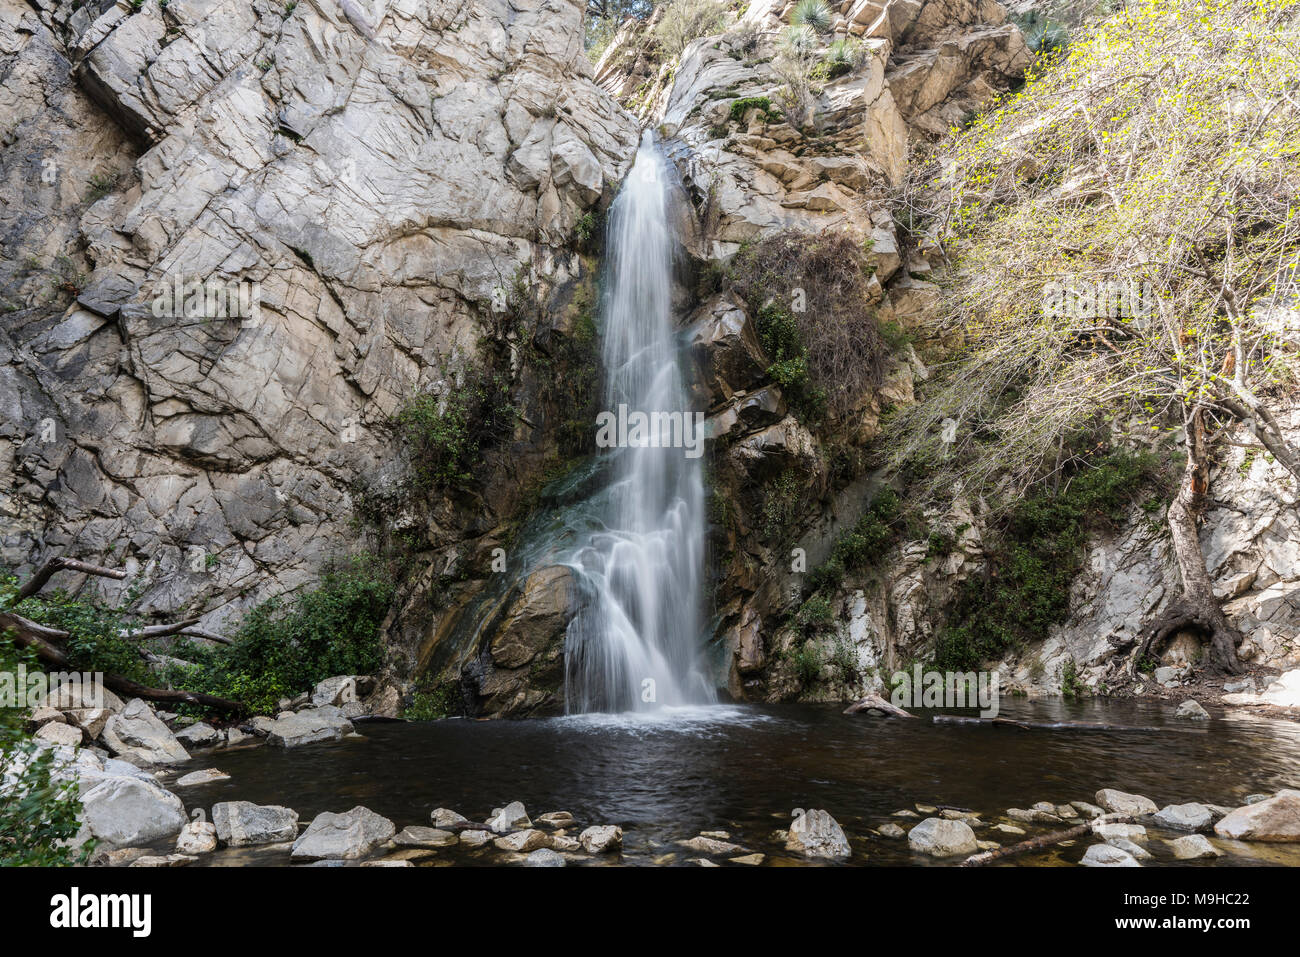 Spring flow at Sturtevant Falls in the San Gabriel Mountains above Los Angeles and Pasadena California. Stock Photo